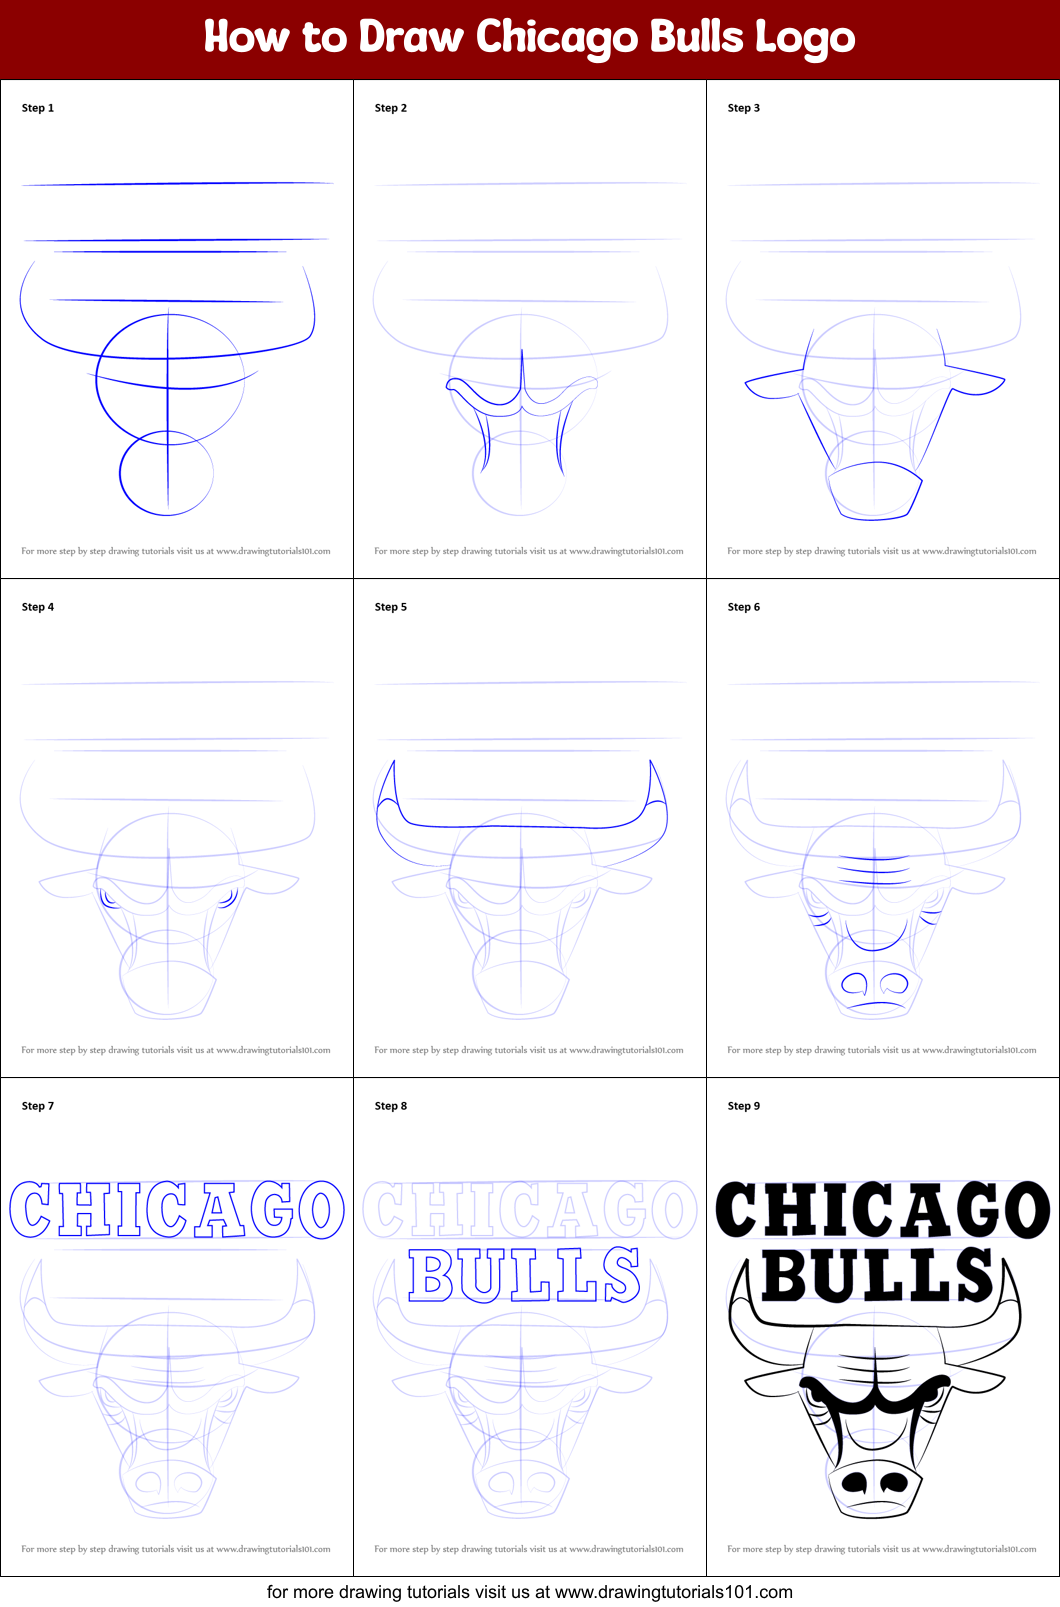 How to Draw Chicago Bulls Logo printable step by step drawing sheet